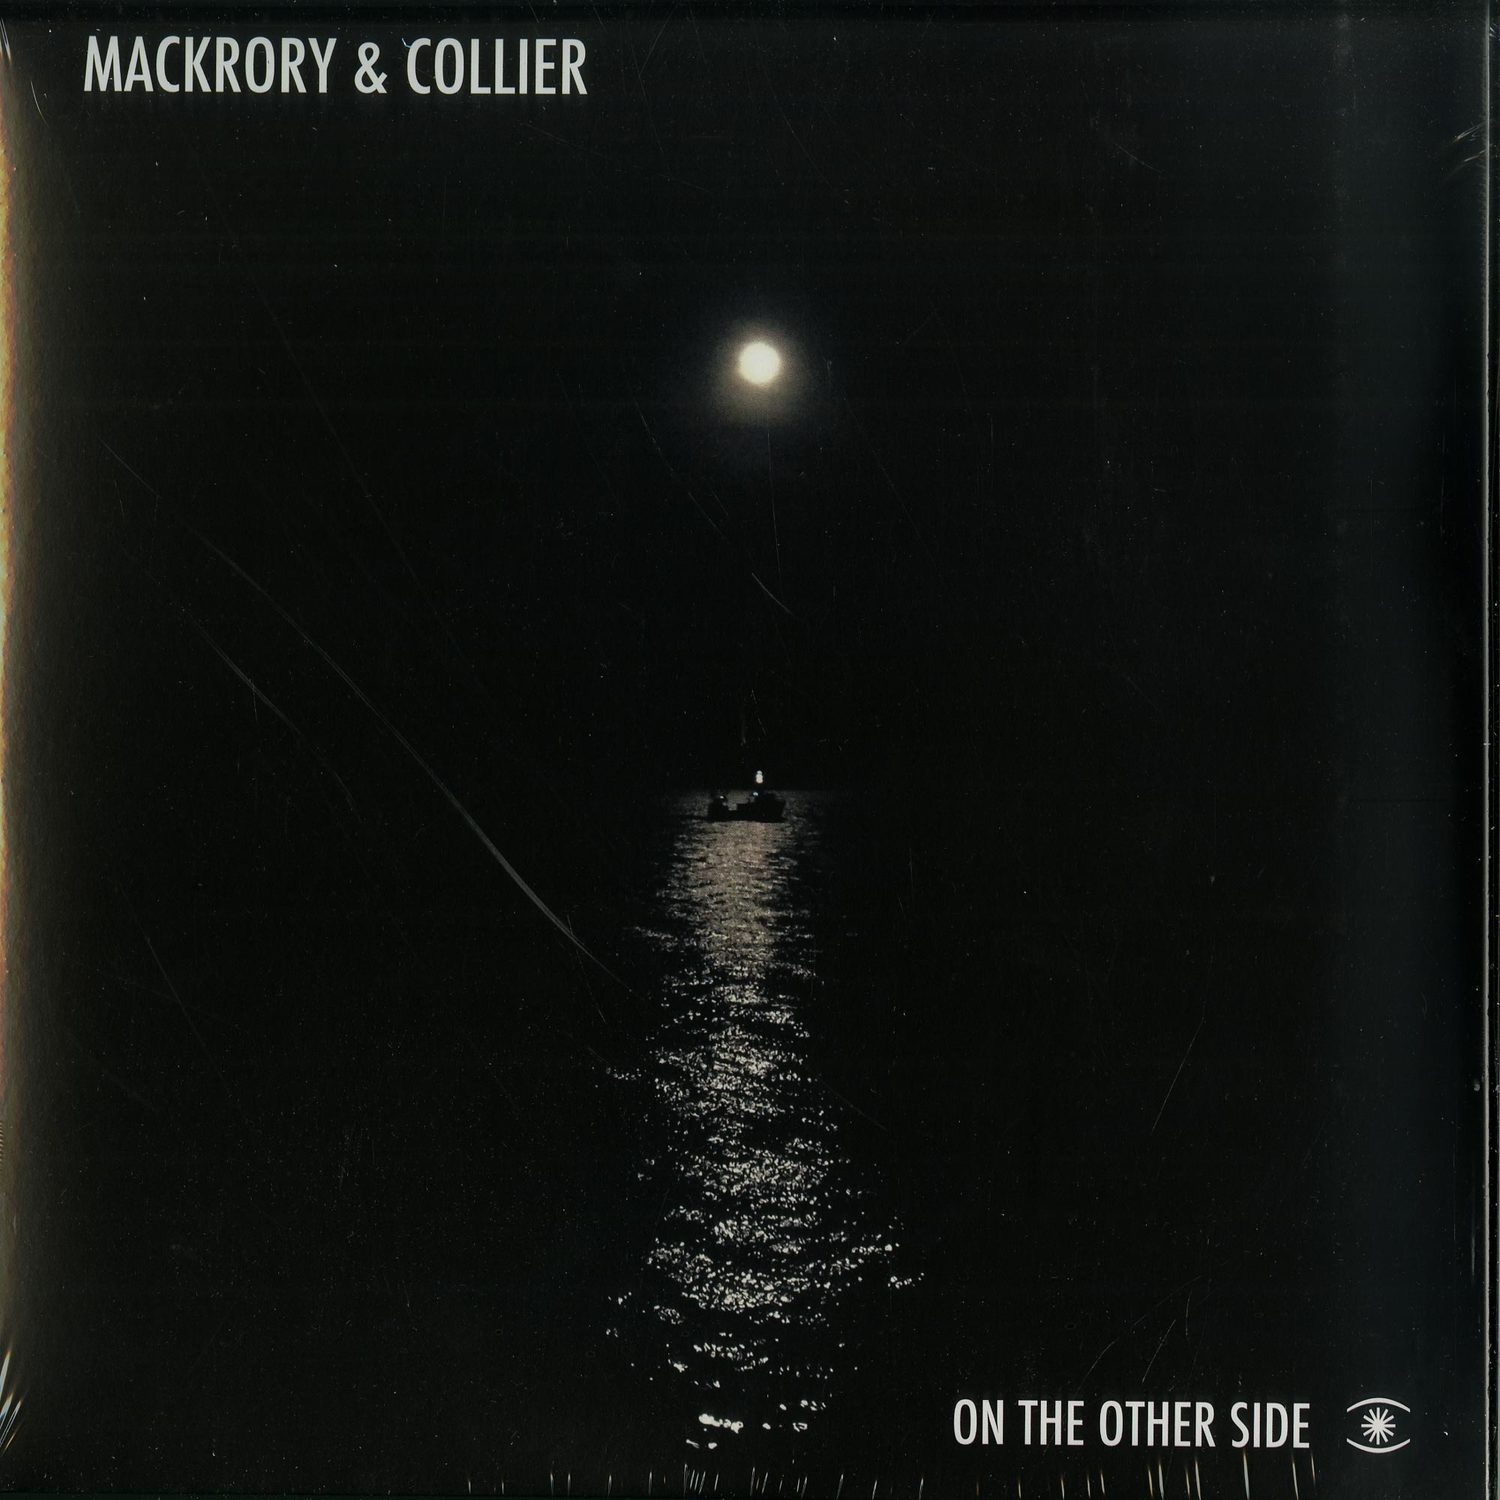 Nick Mackrory & Harry Collier - ON THE OTHER SIDE 